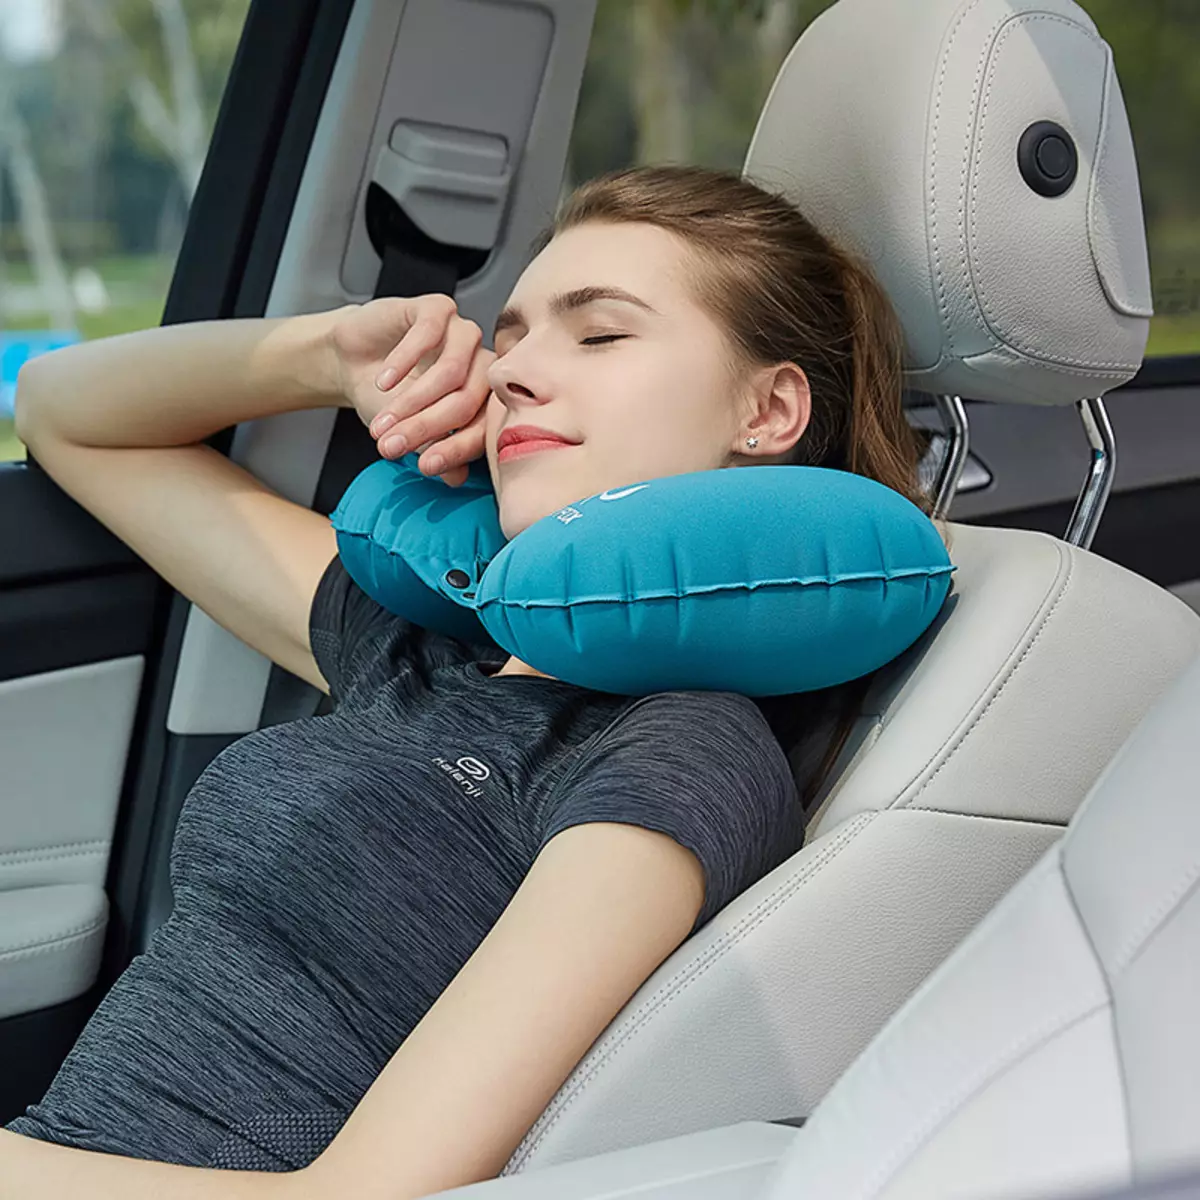 Travel Pillows: Road Pillows For Sleeping Plane, Neck Pillows, Head And Foot, Baby and Adults, Transformers 20755_5